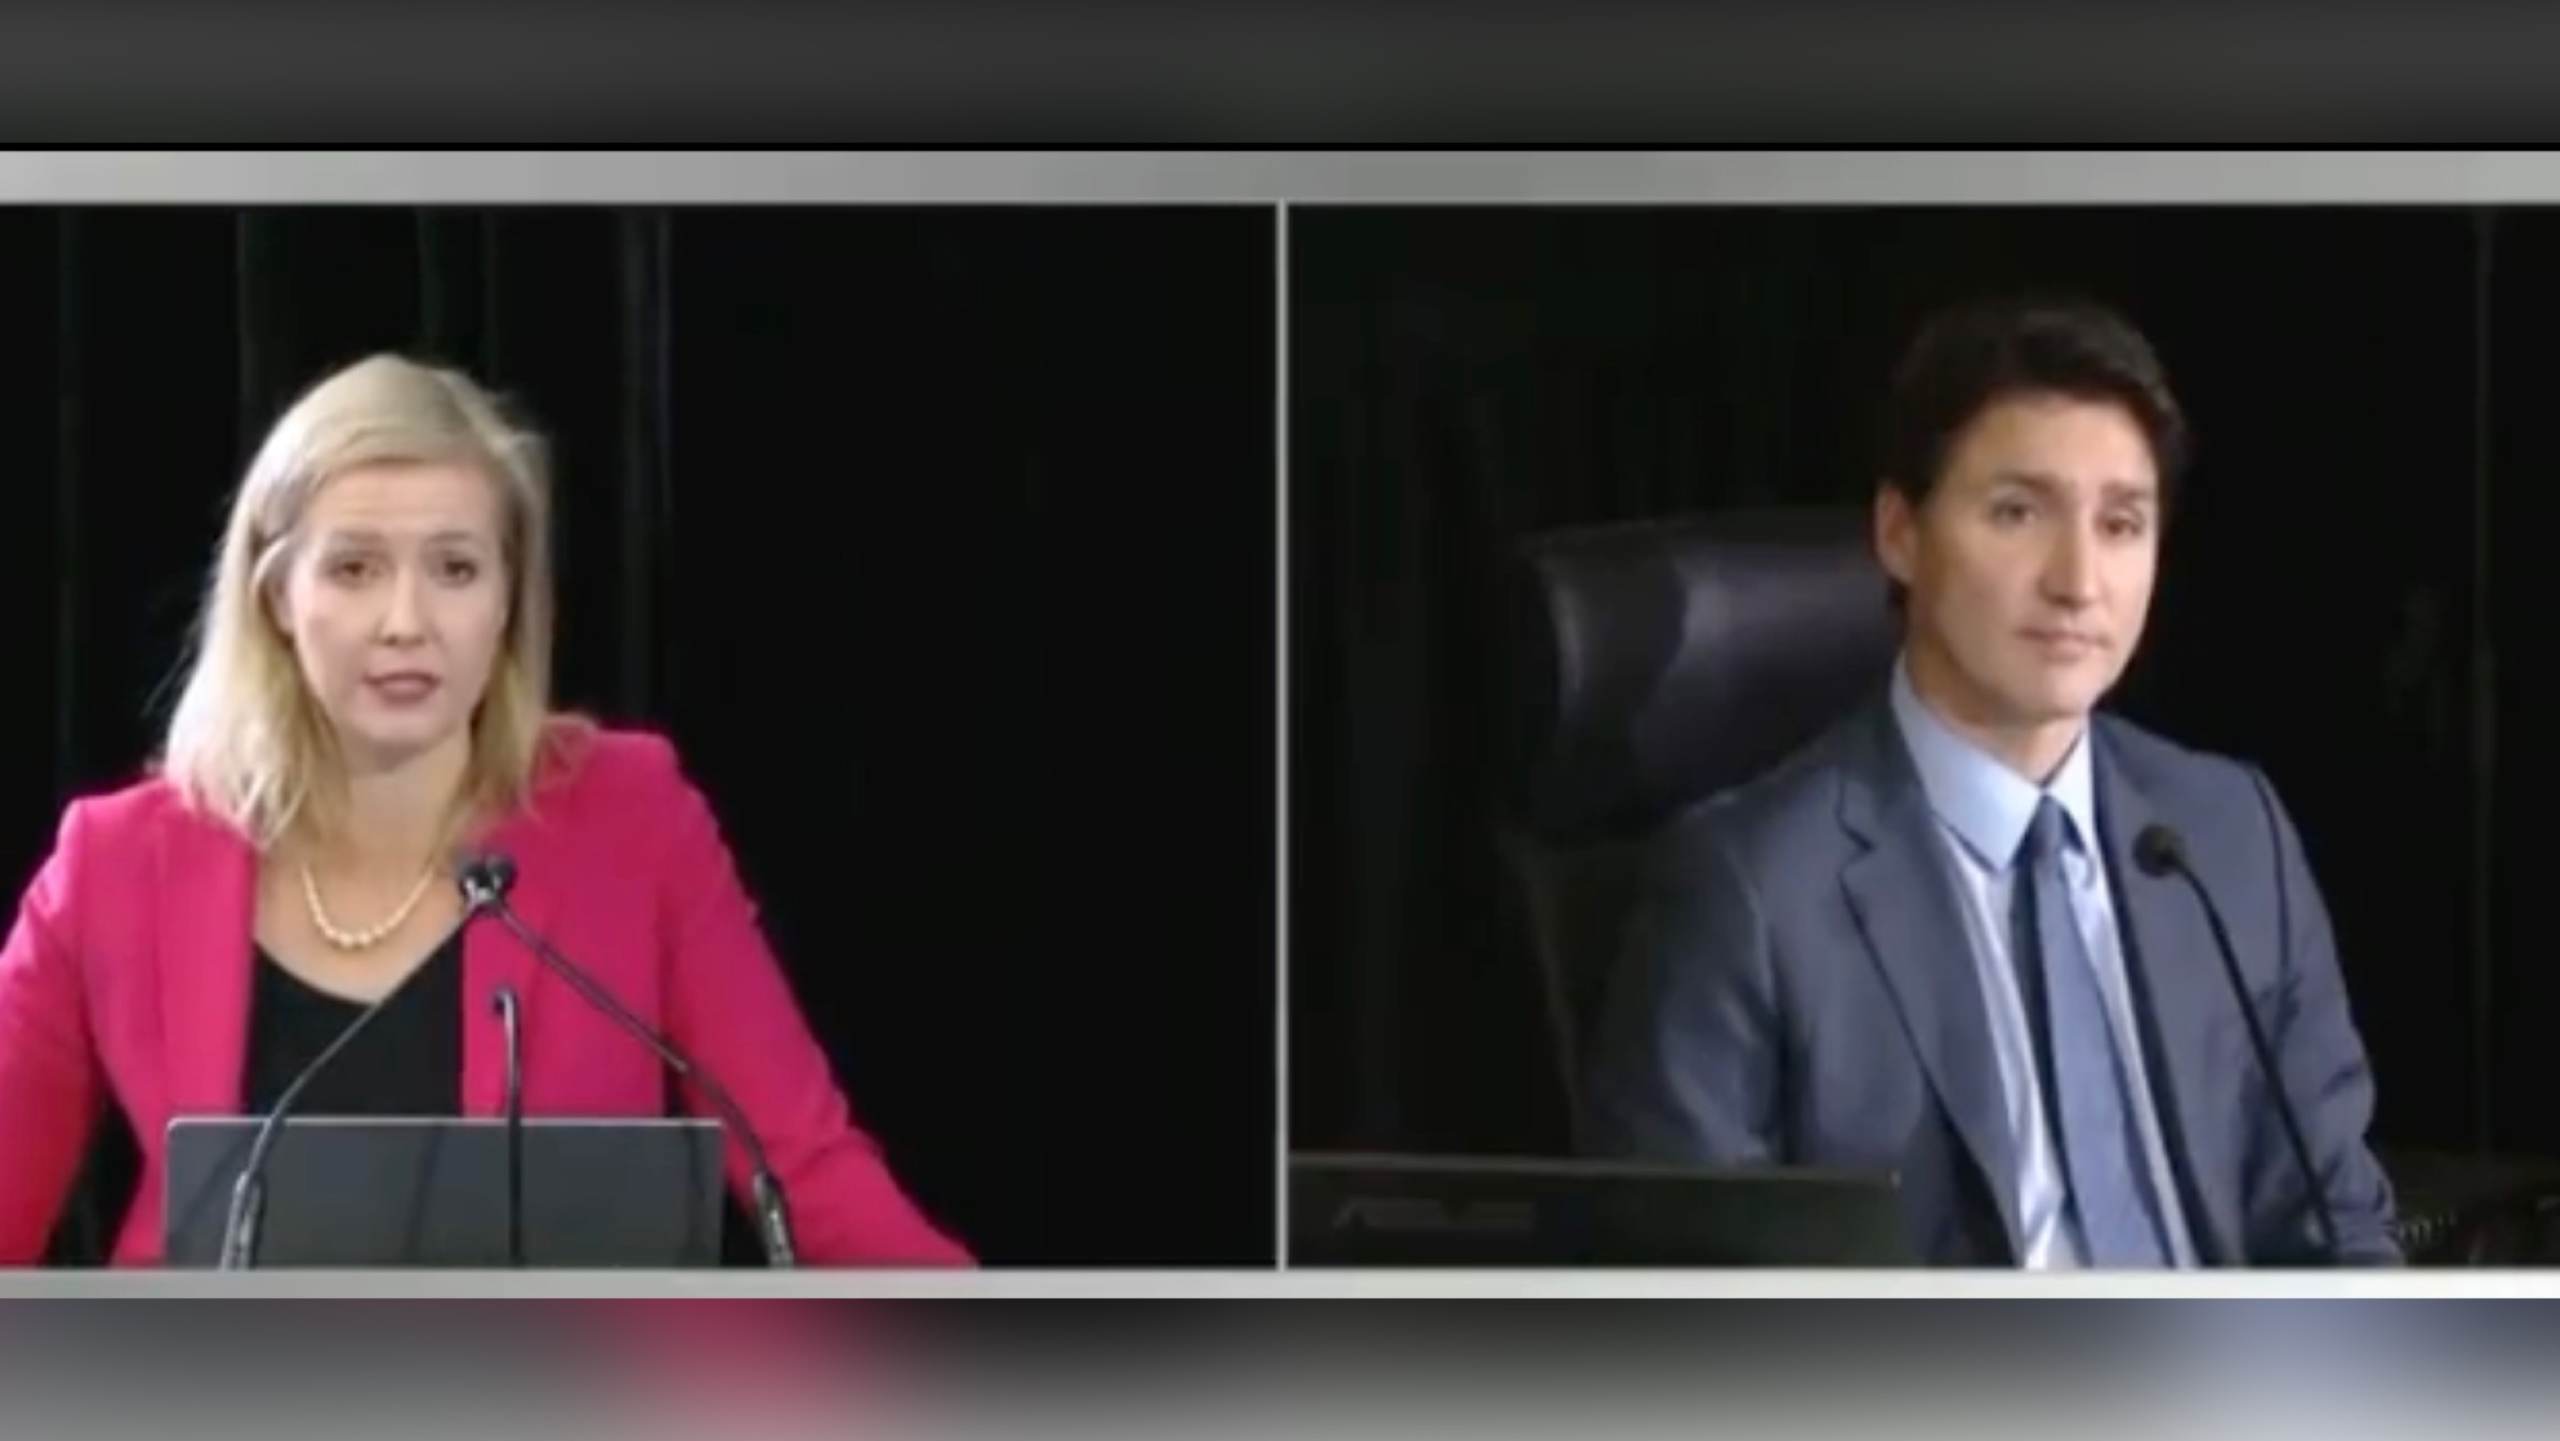 Tyrant Justin Trudeau Lies Under Oath – Claims He Did Not Call Unvaccinated People “Racists and Misogynists” But Video Proves Otherwise